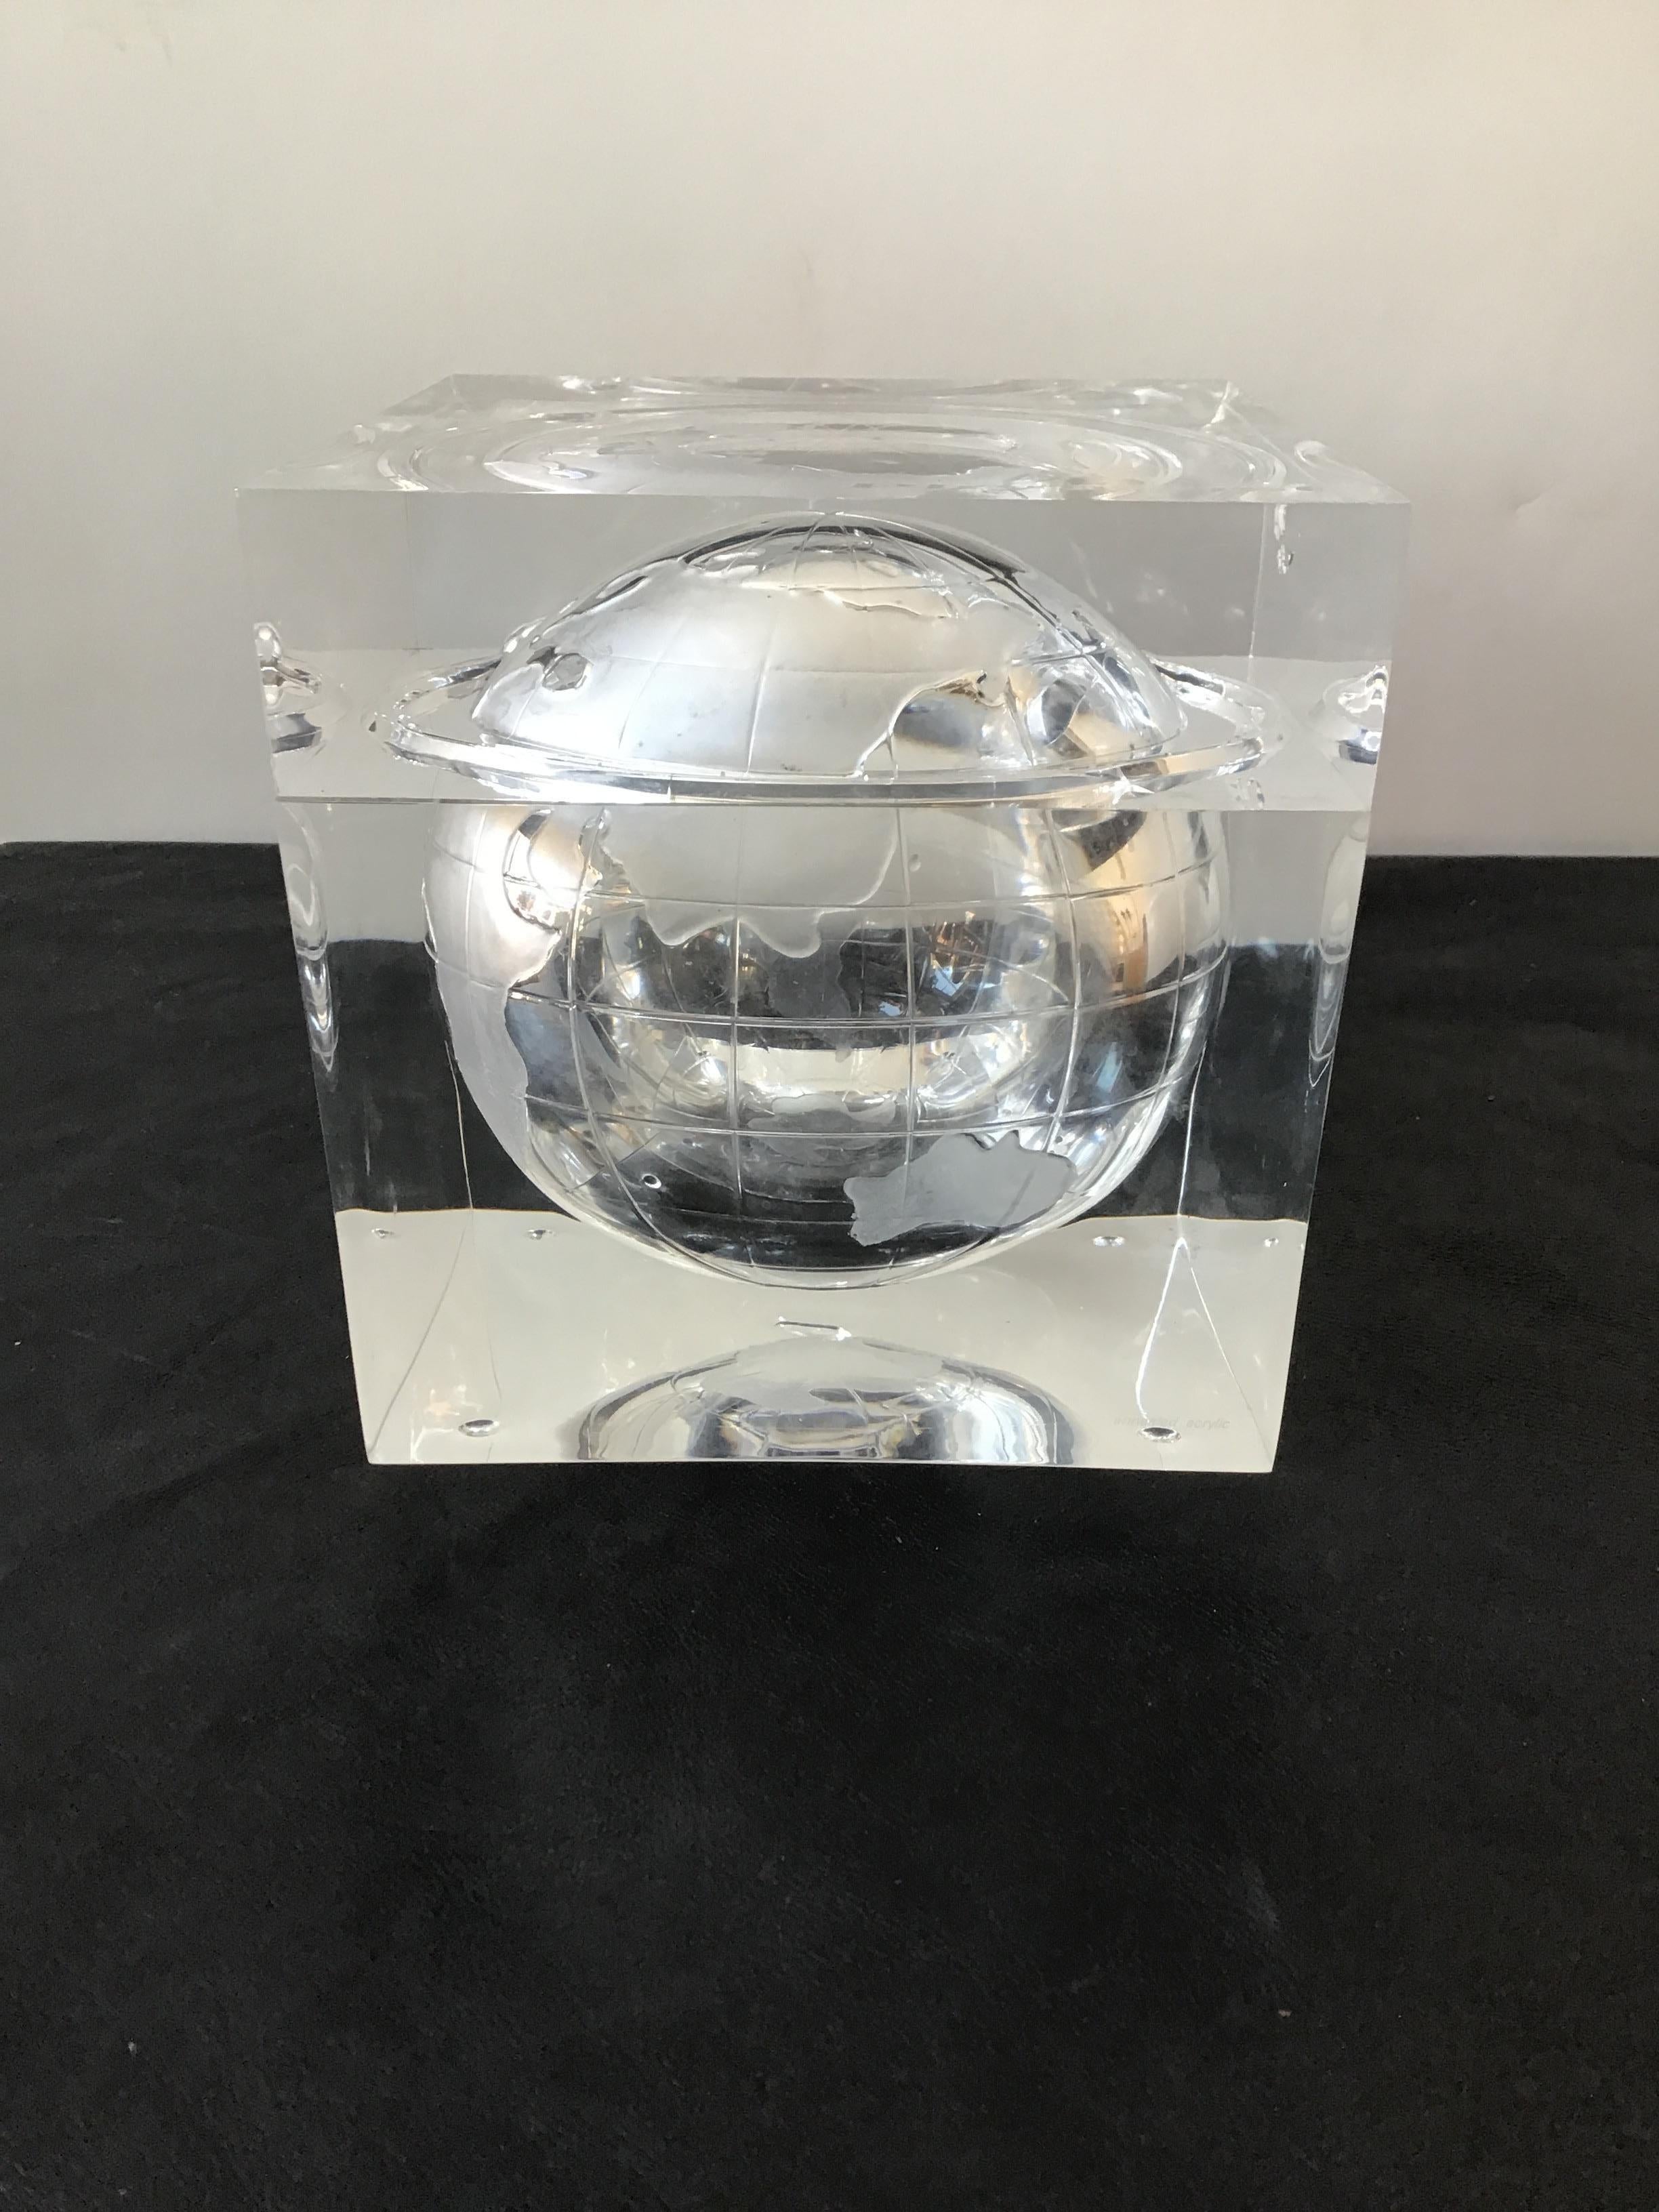 Albrizzi Lucite world globe ice bucket. Phytrust is stamped on the lid as shown in image 5.